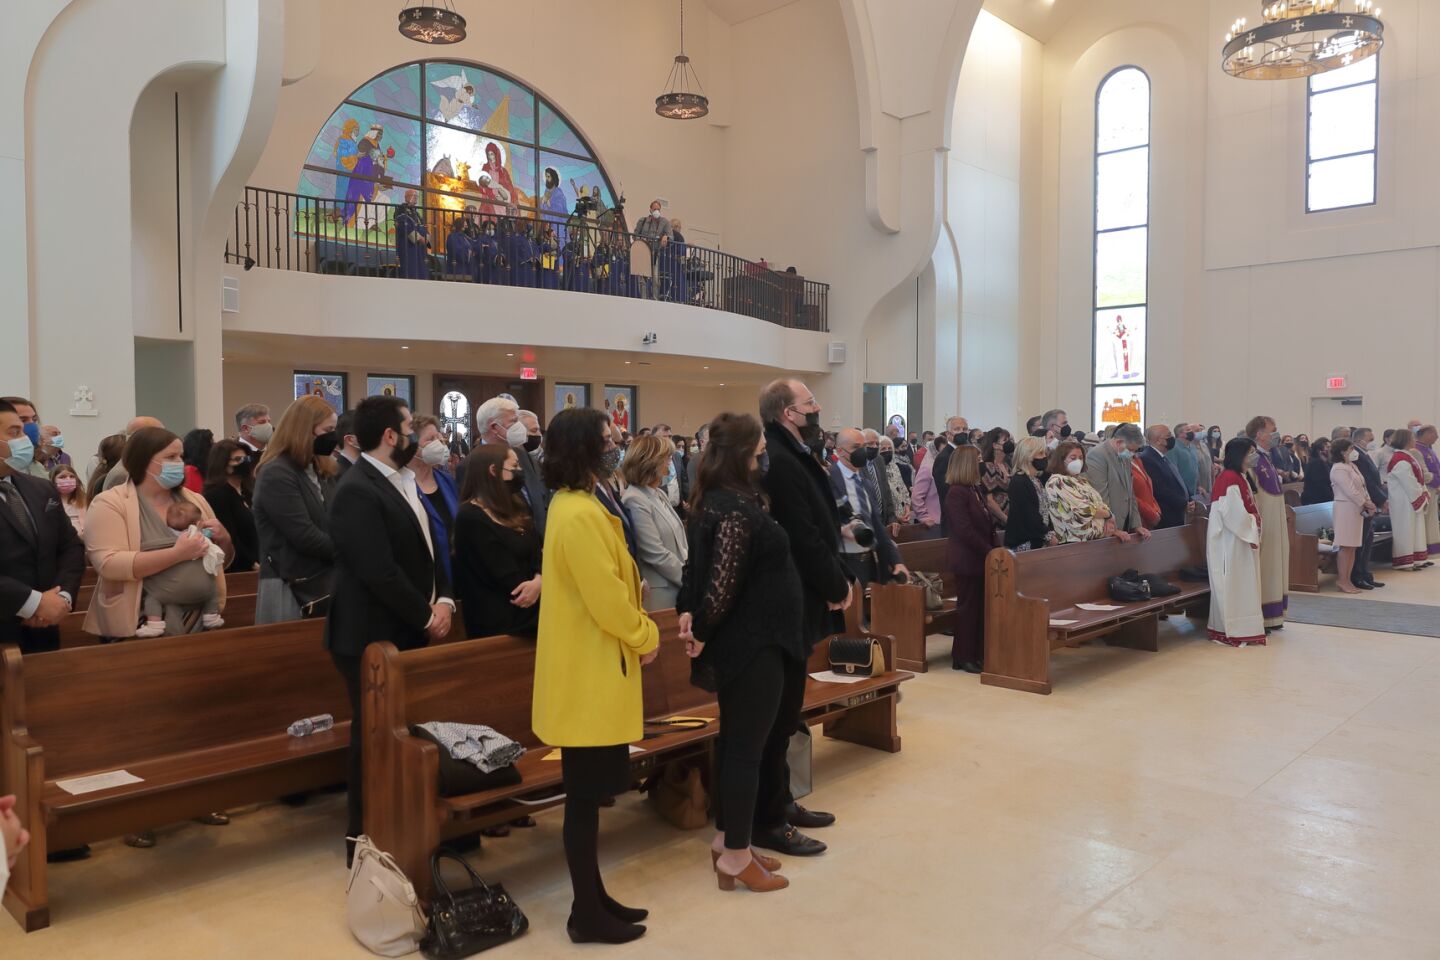 The consecration and church naming ceremony at the new St. John Garabed Armenian Church in the Carmel Valley area of San Diego